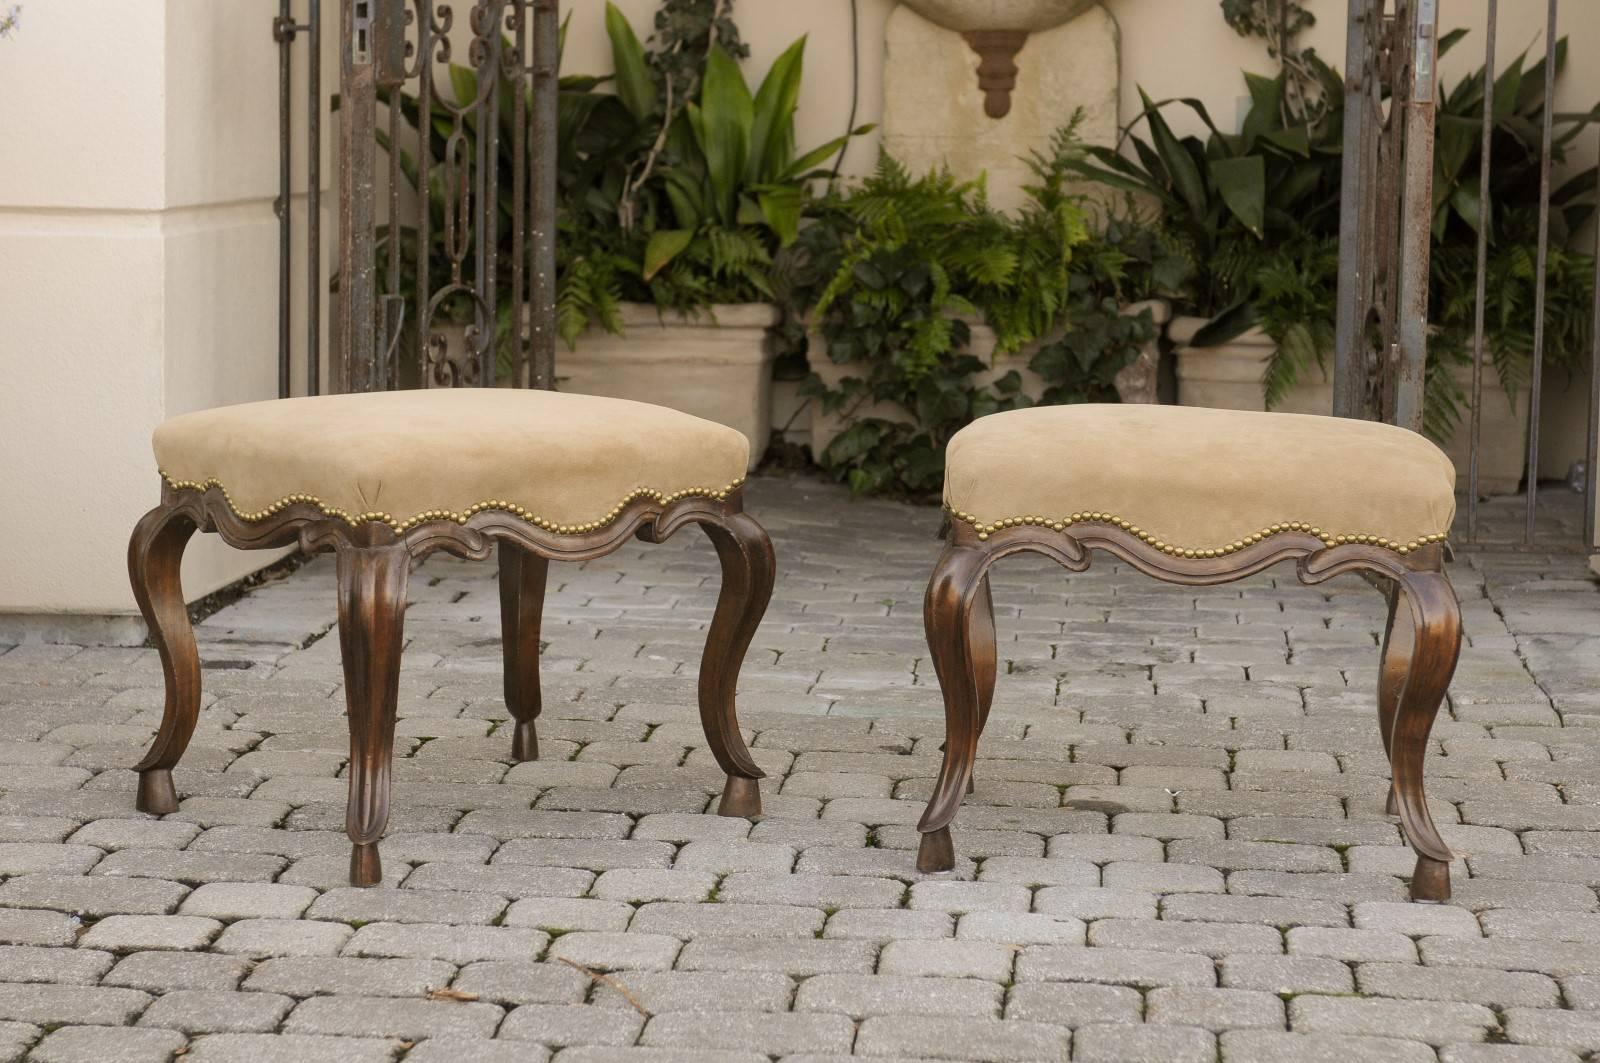 An exquisite pair of 19th century Italian walnut stools. This pair of Italian stools features four dark wood cabriole legs delicately profiled and raised on hoofed feet. The upholstery used is a light brown Suede with nailhead surround. With its